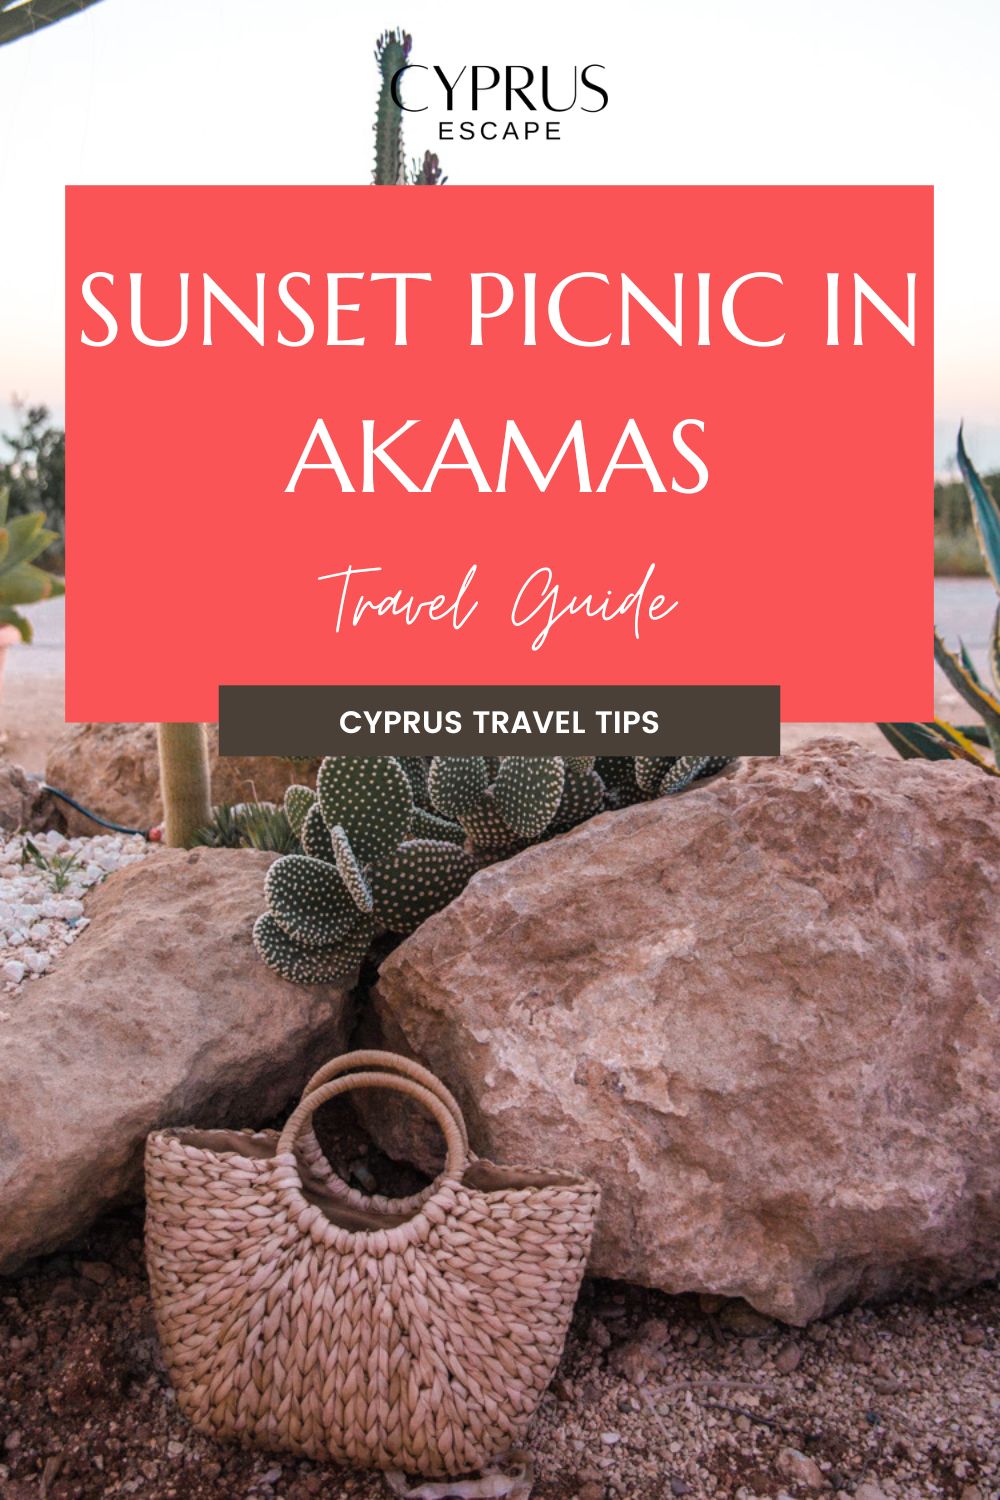 Pinterest Image for an Article About Sunset Picnic in Akamas